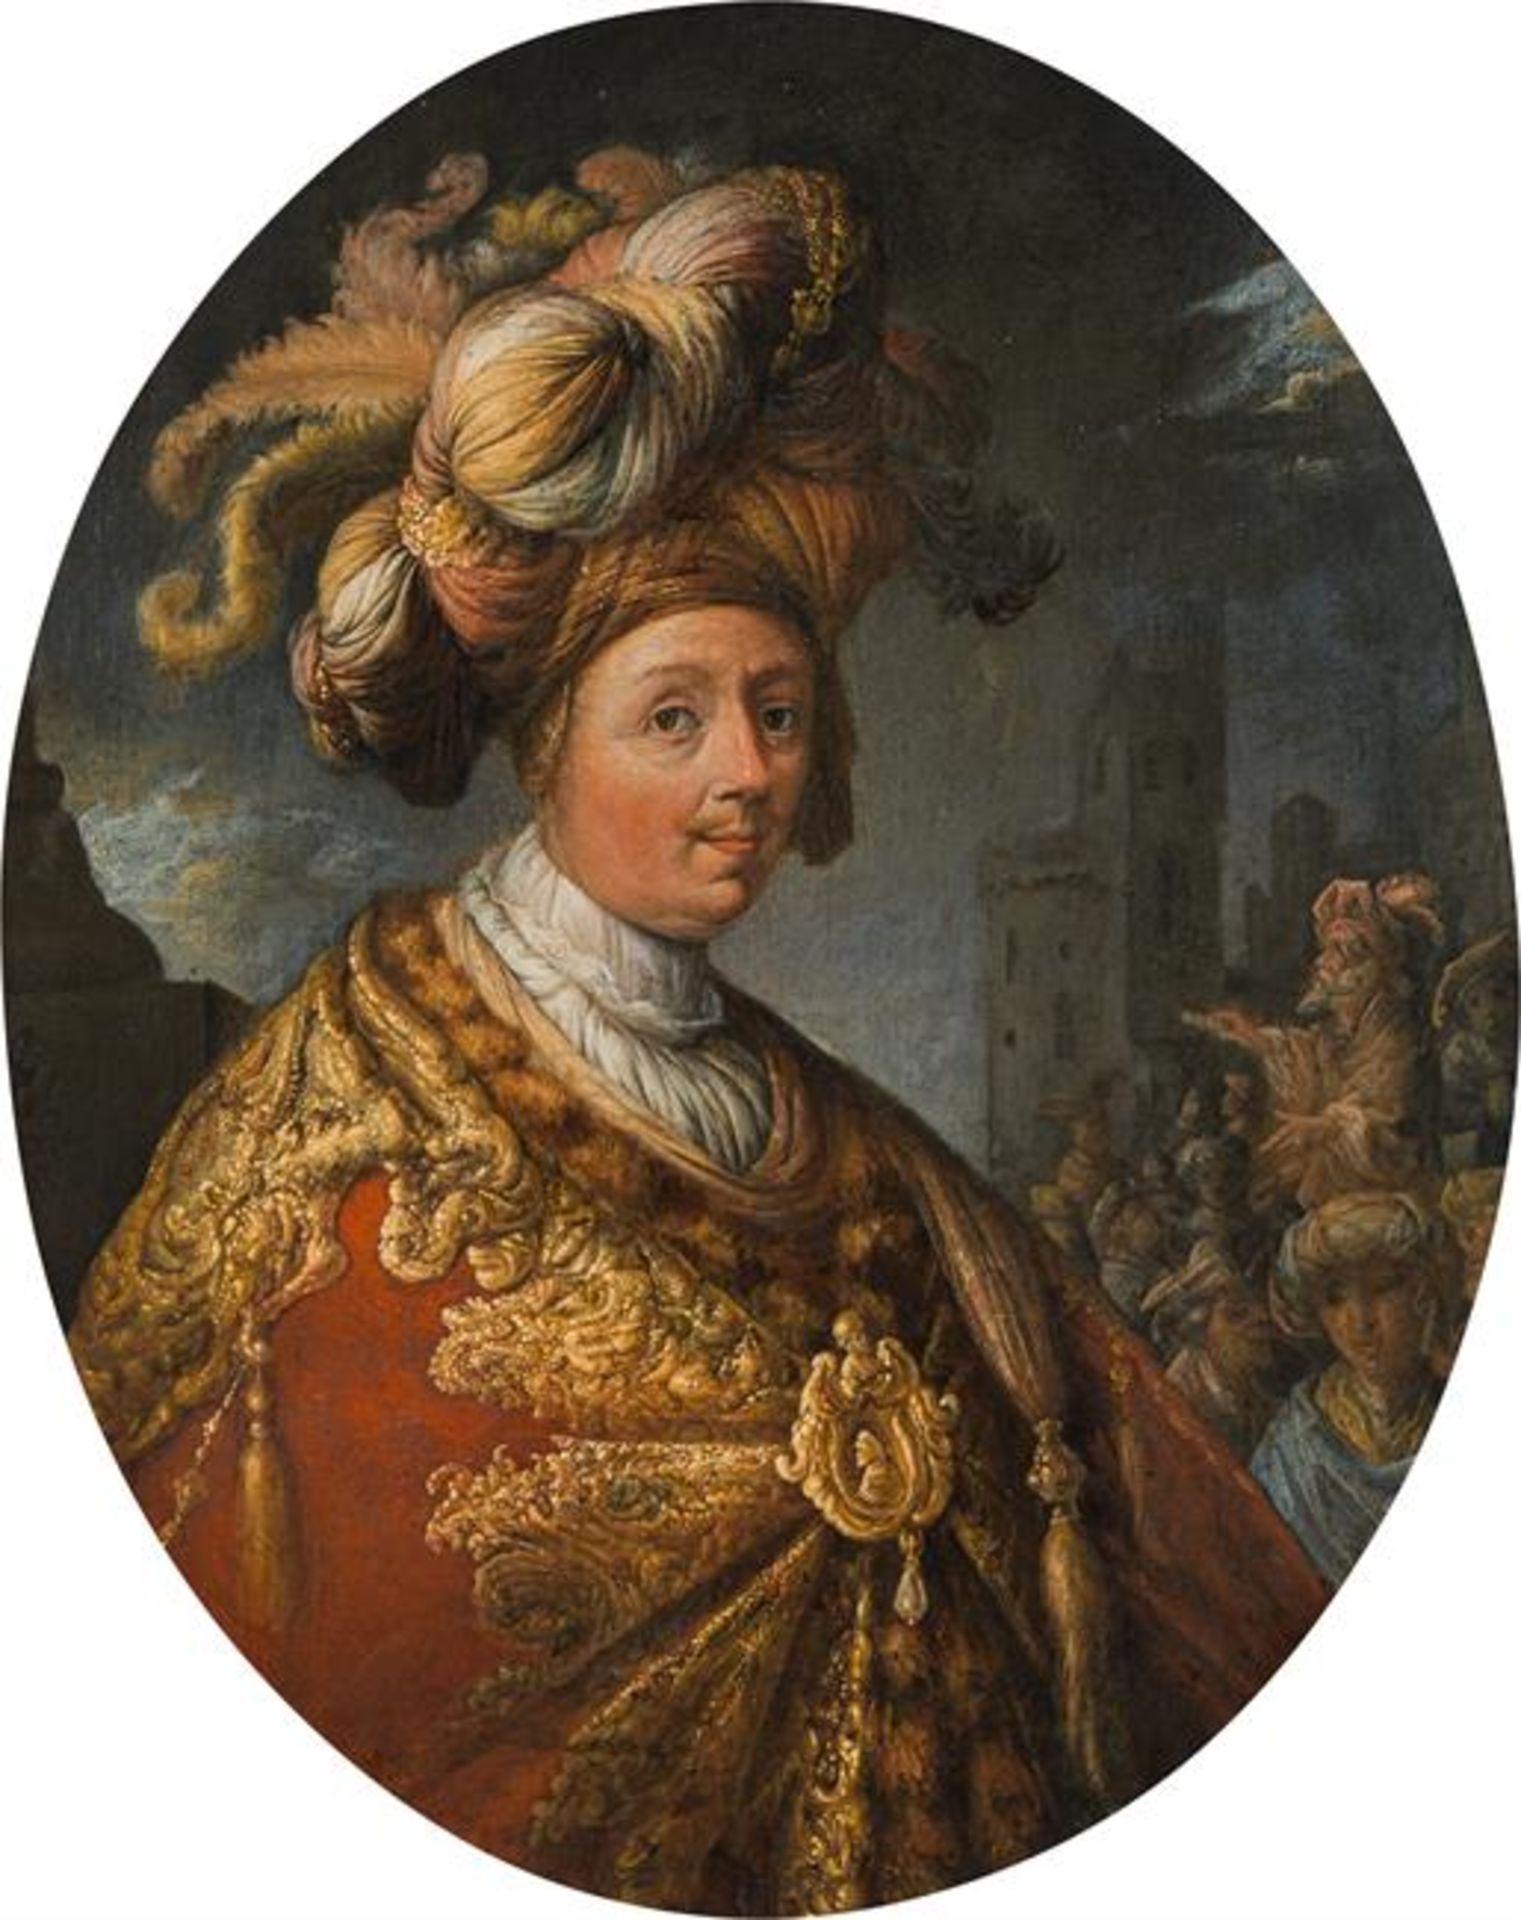 Jan Adriaensz. van Staveren: Portrait of a man and a woman in a richly embroidered coat - Image 4 of 6